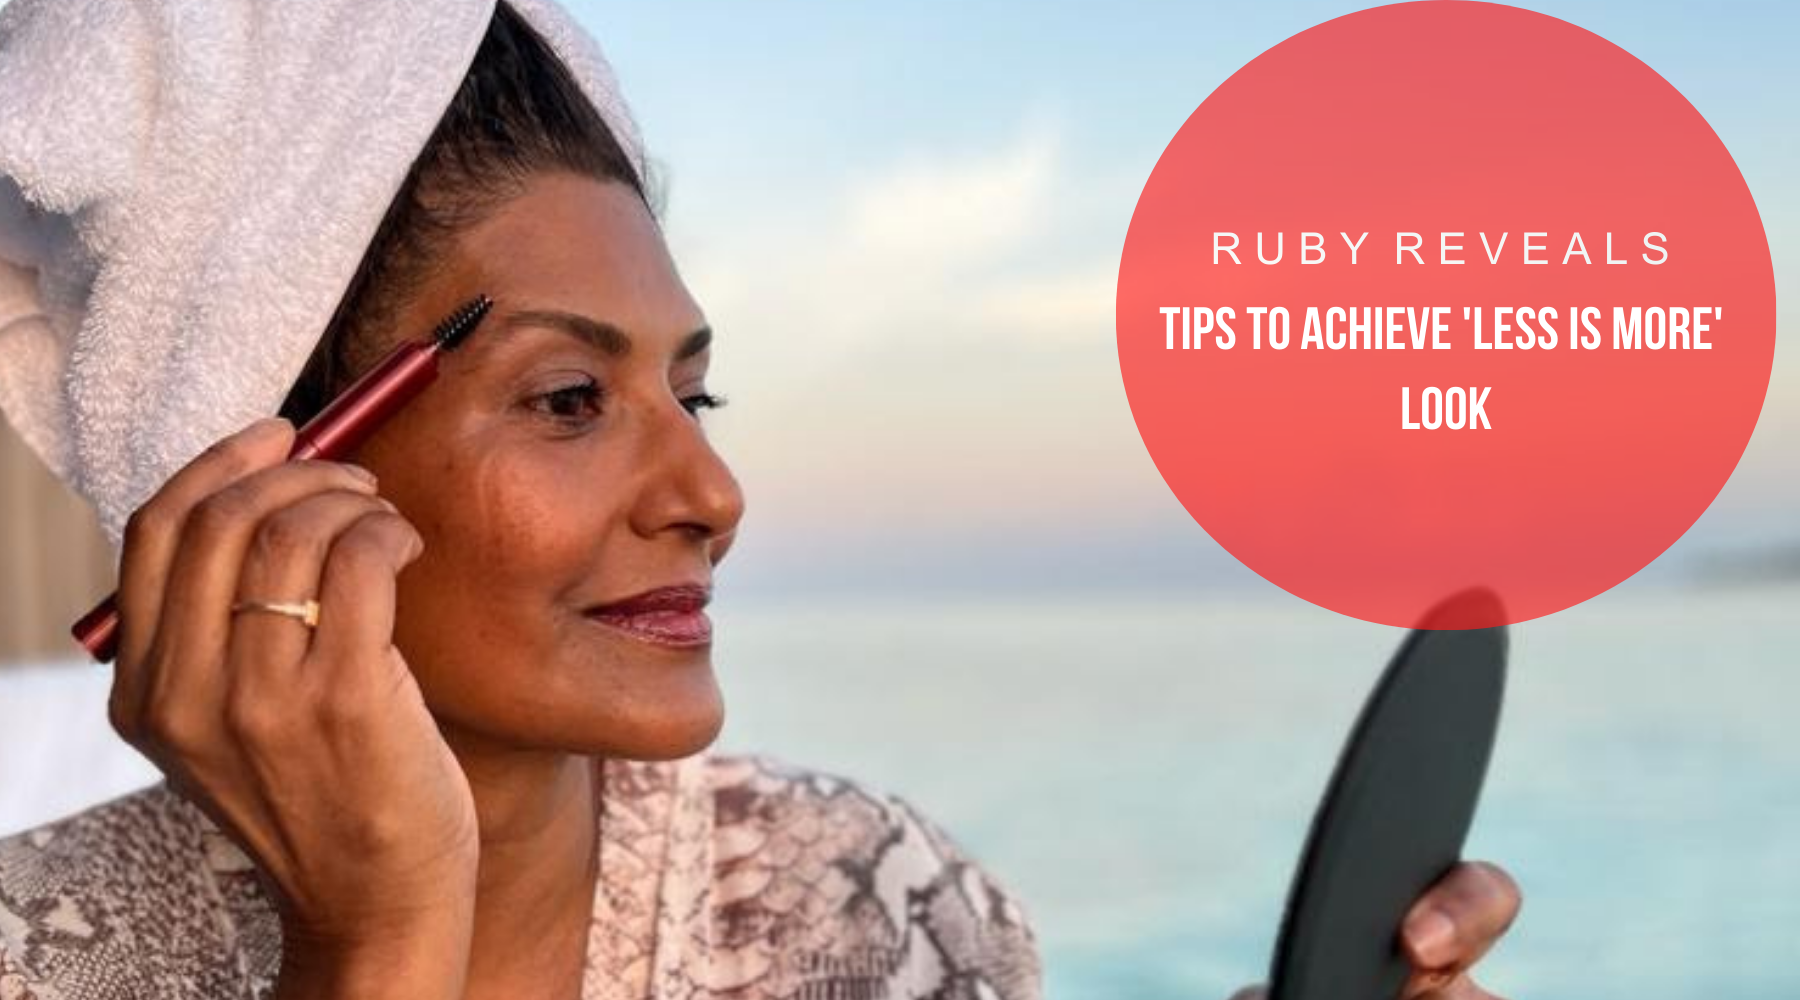 RUBY REVEALS | TIPS TO ACHIEVE 'LESS IS MORE' LOOK